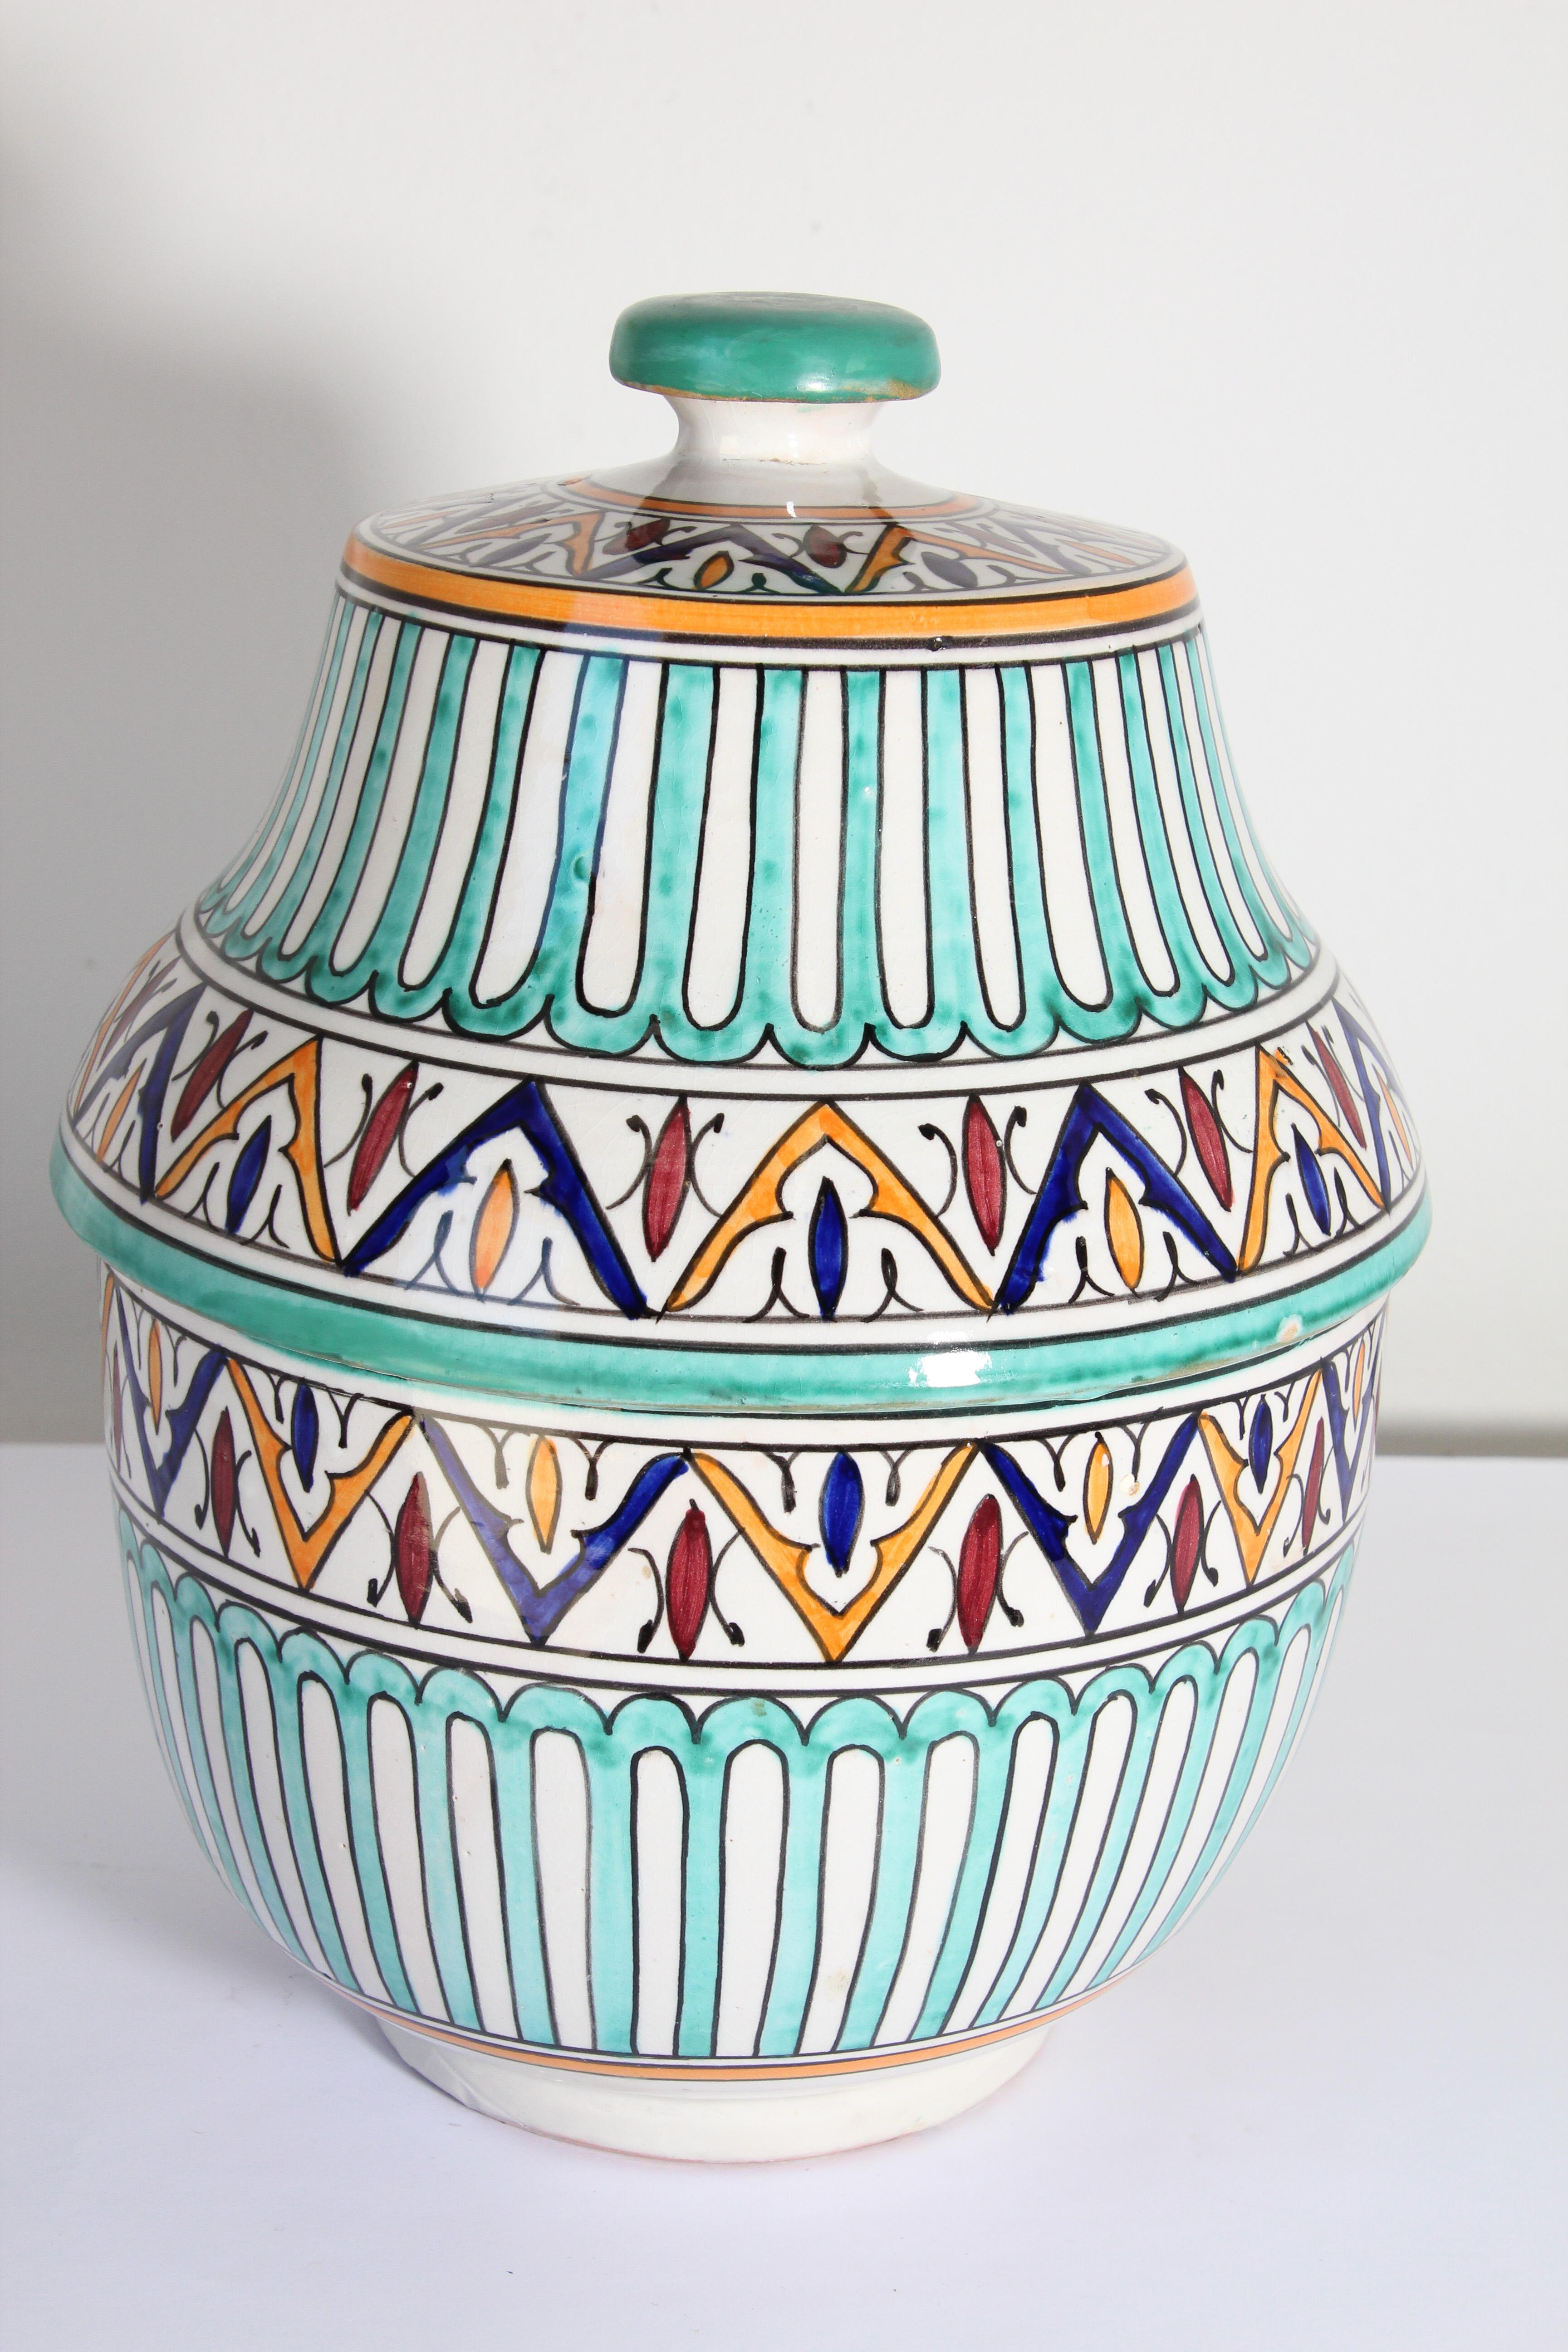 Islamic Handcrafted Ceramic Glazed Covered Jar in Fez Morocco For Sale